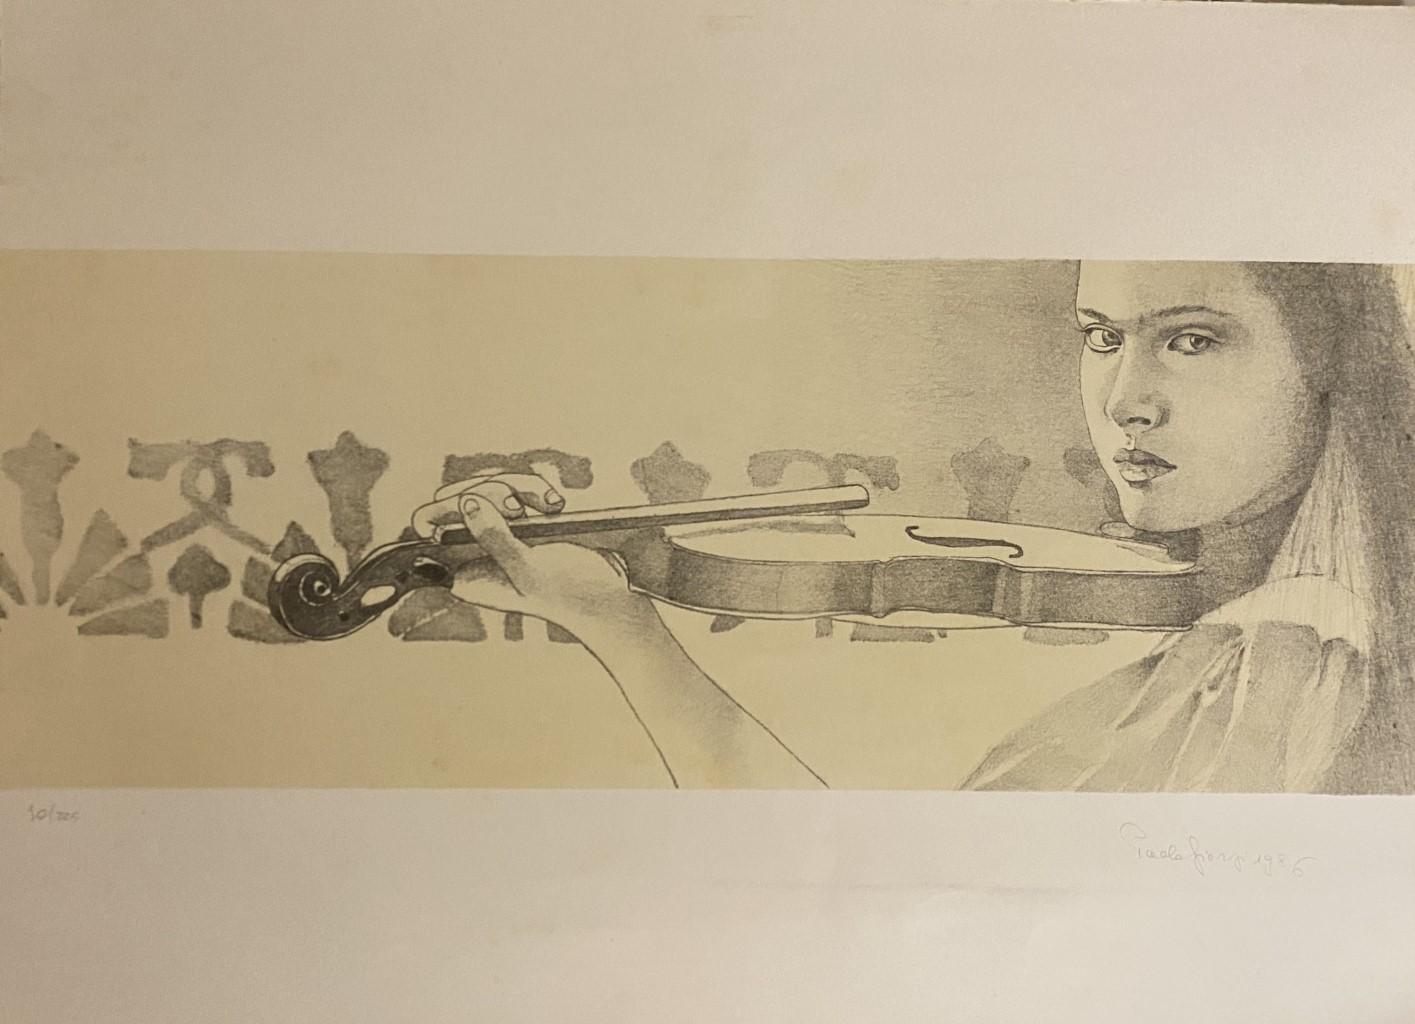 The Violin is a splendid lithograph on paper engraved by Paolo Giorgi, in 1986.

The state of preservation of the artwork is excellent. 

Hand-signed, on the lower right. Numbered, 90/225 of prints, on the lower left.

This beautiful artwork